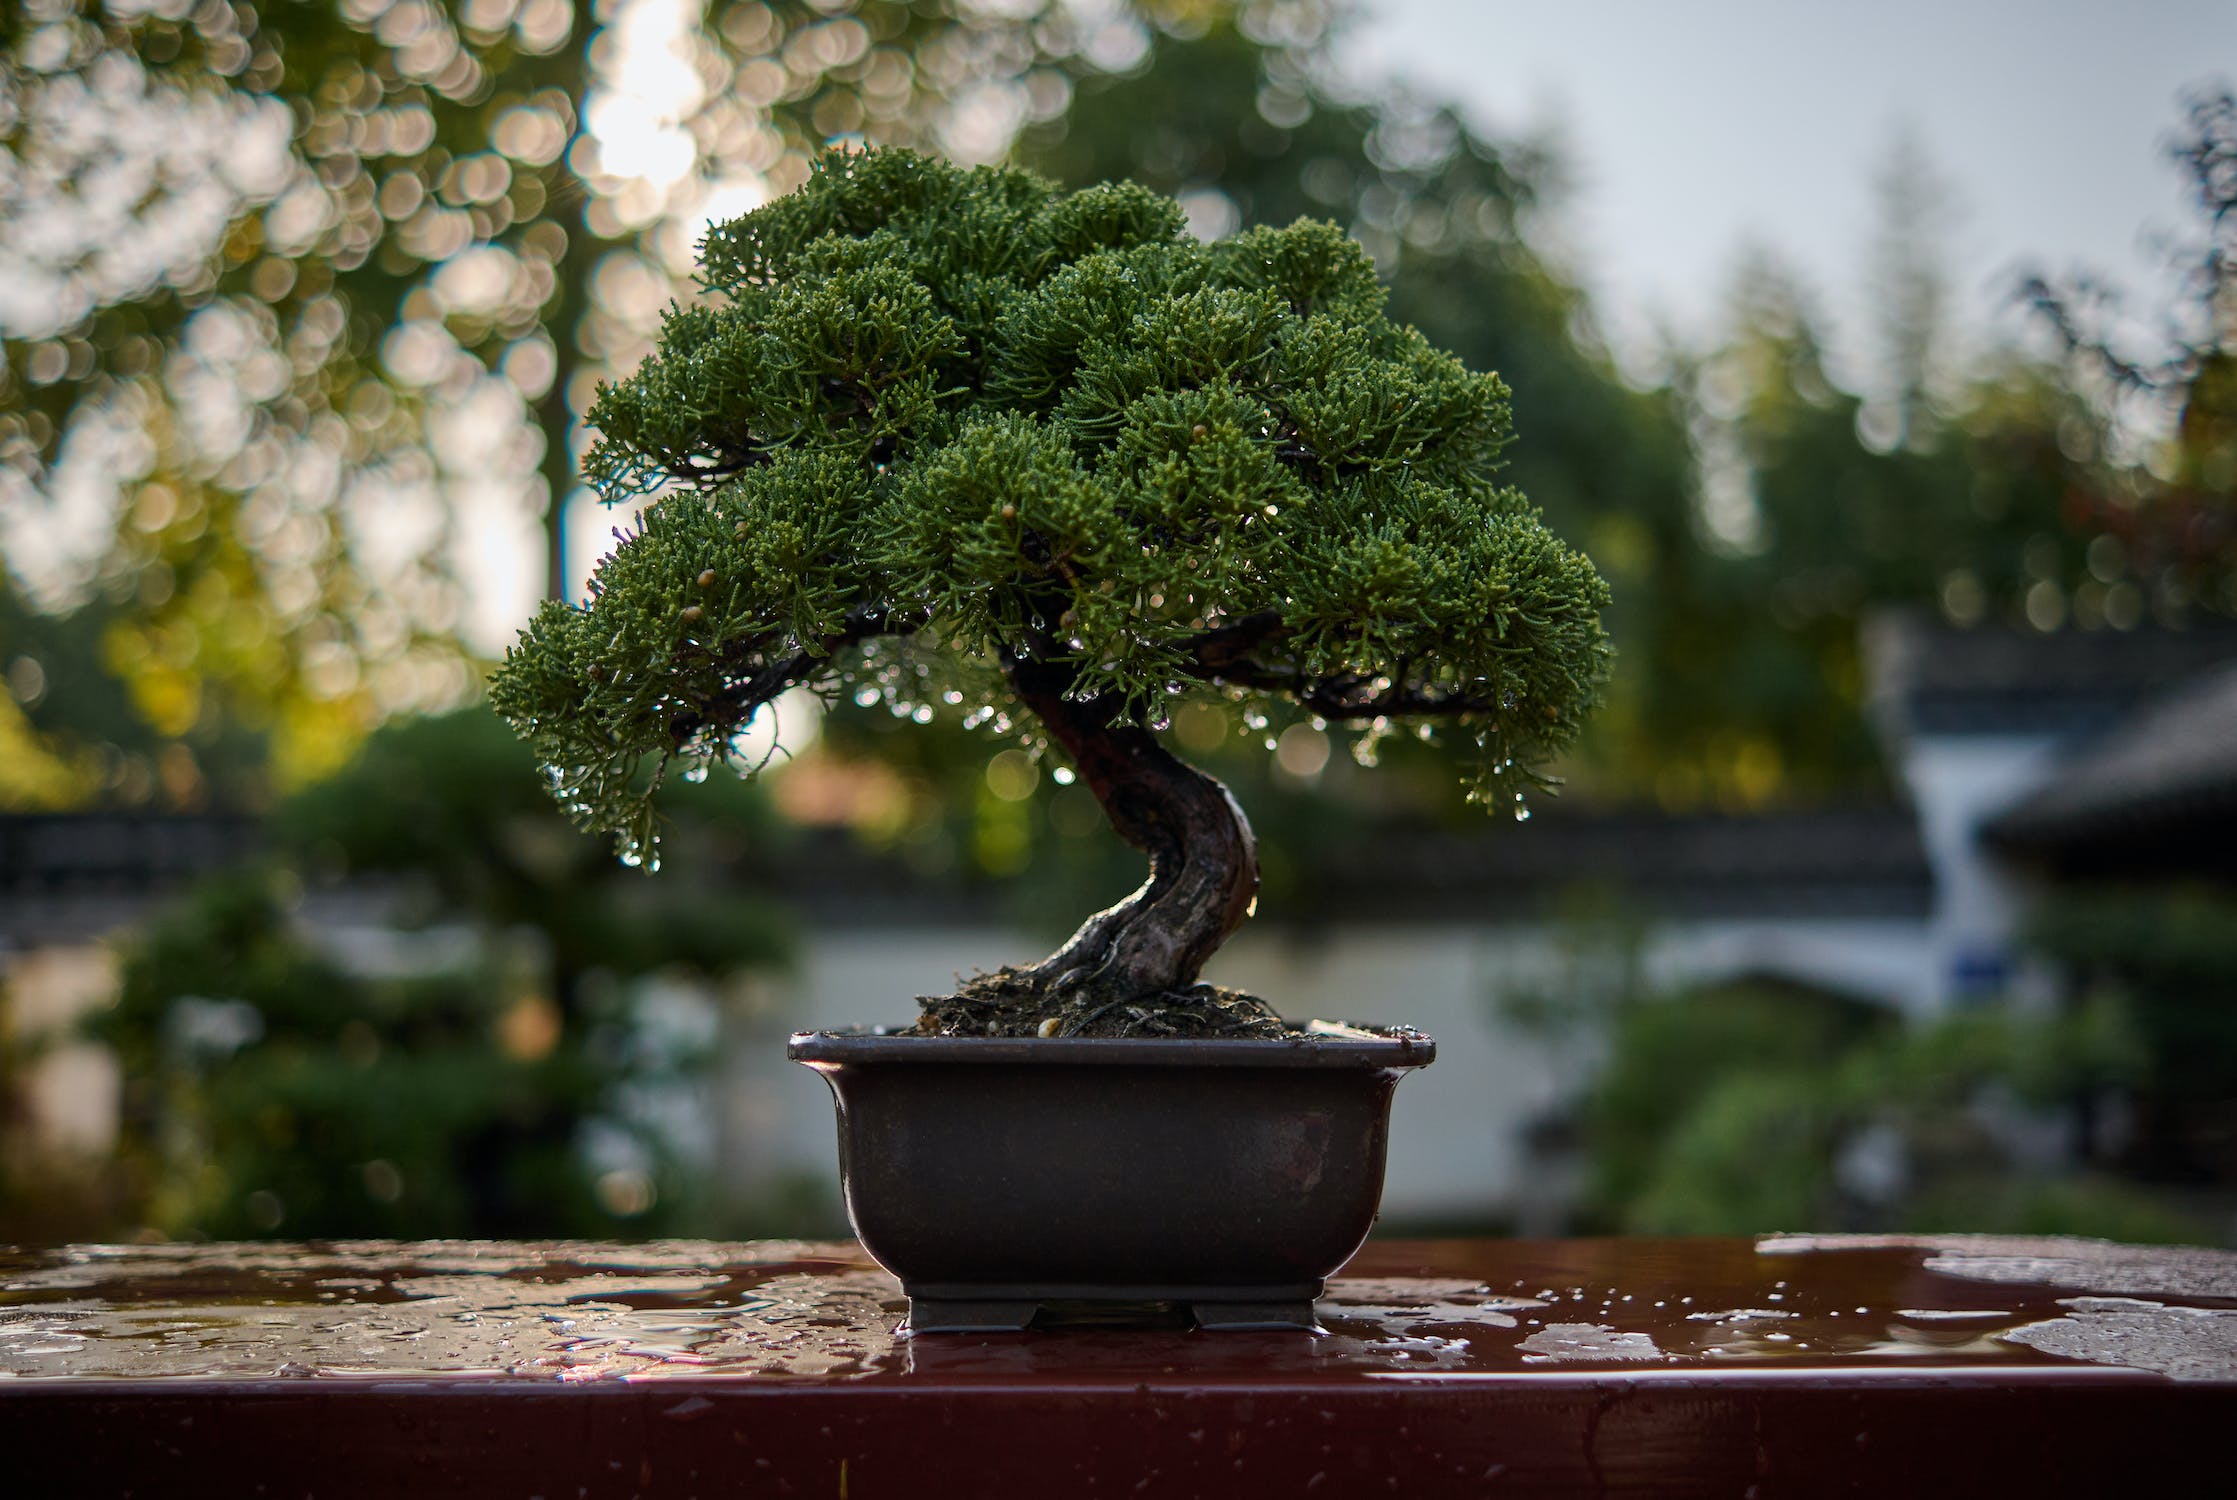 How to Take Care of Bonsai Plants?